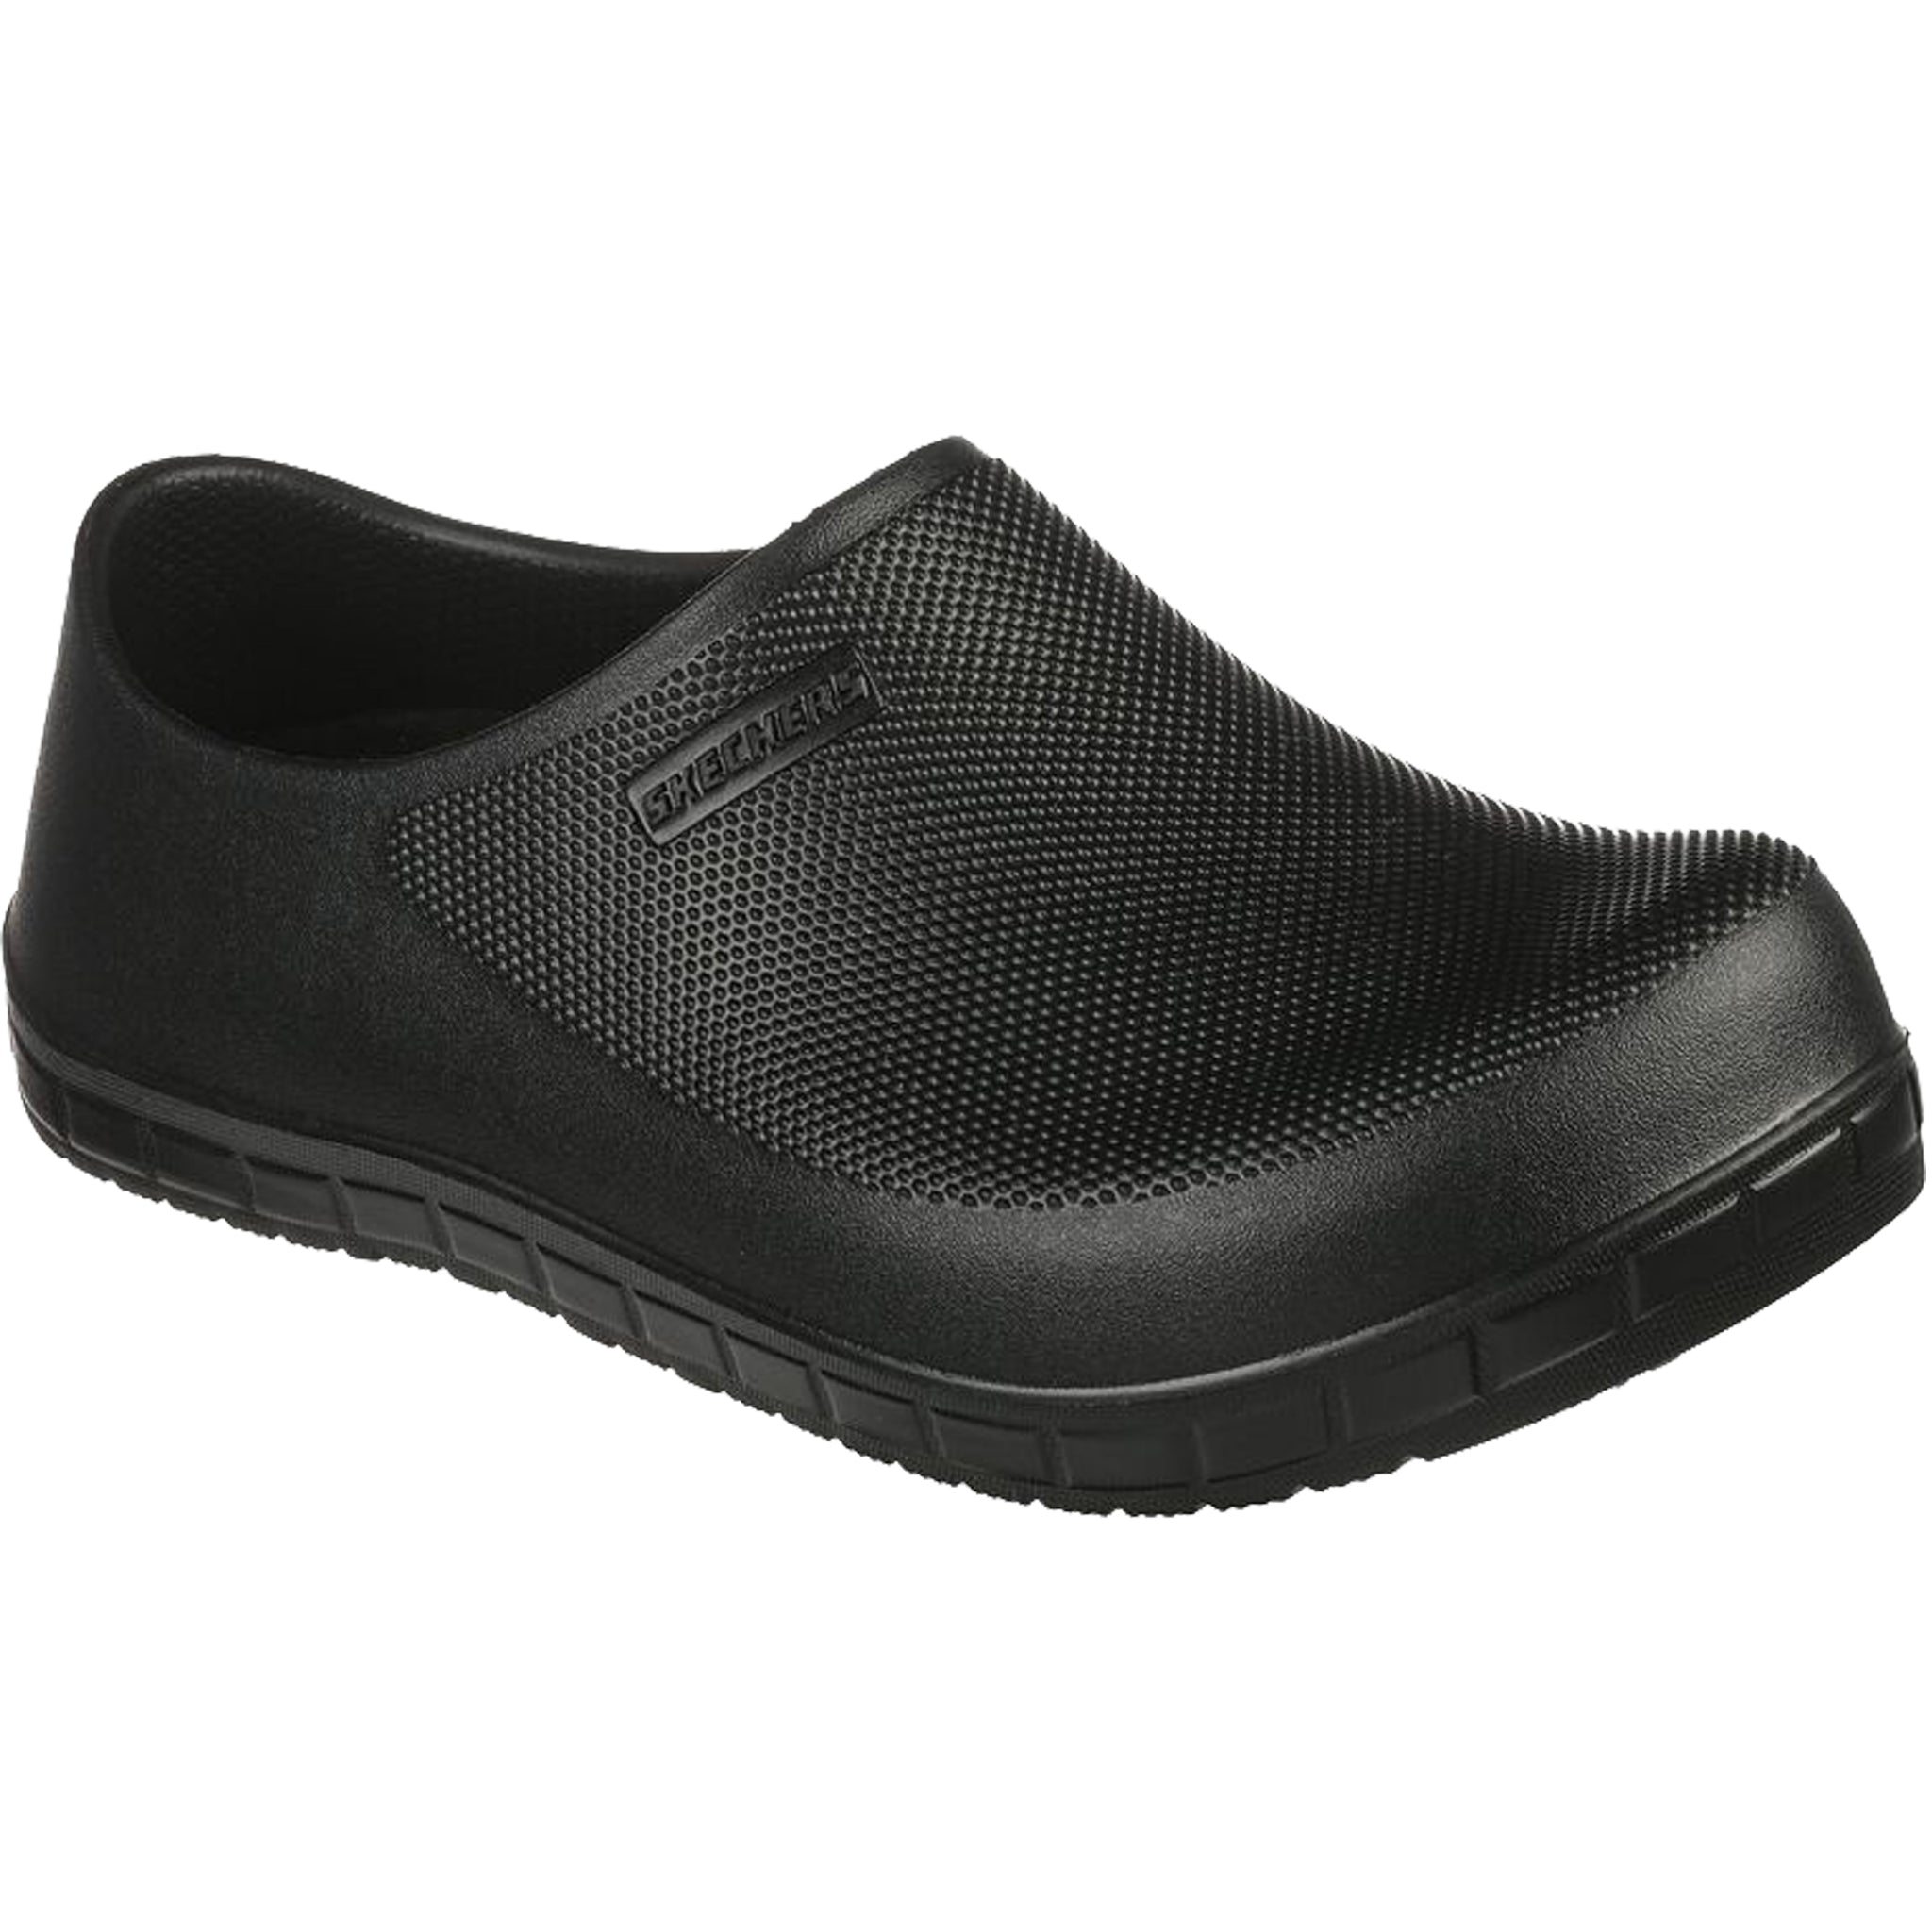 Skechers Women's 108048 Evaa Slip Resistant Slip On Work Shoes – That Shoe Store and More